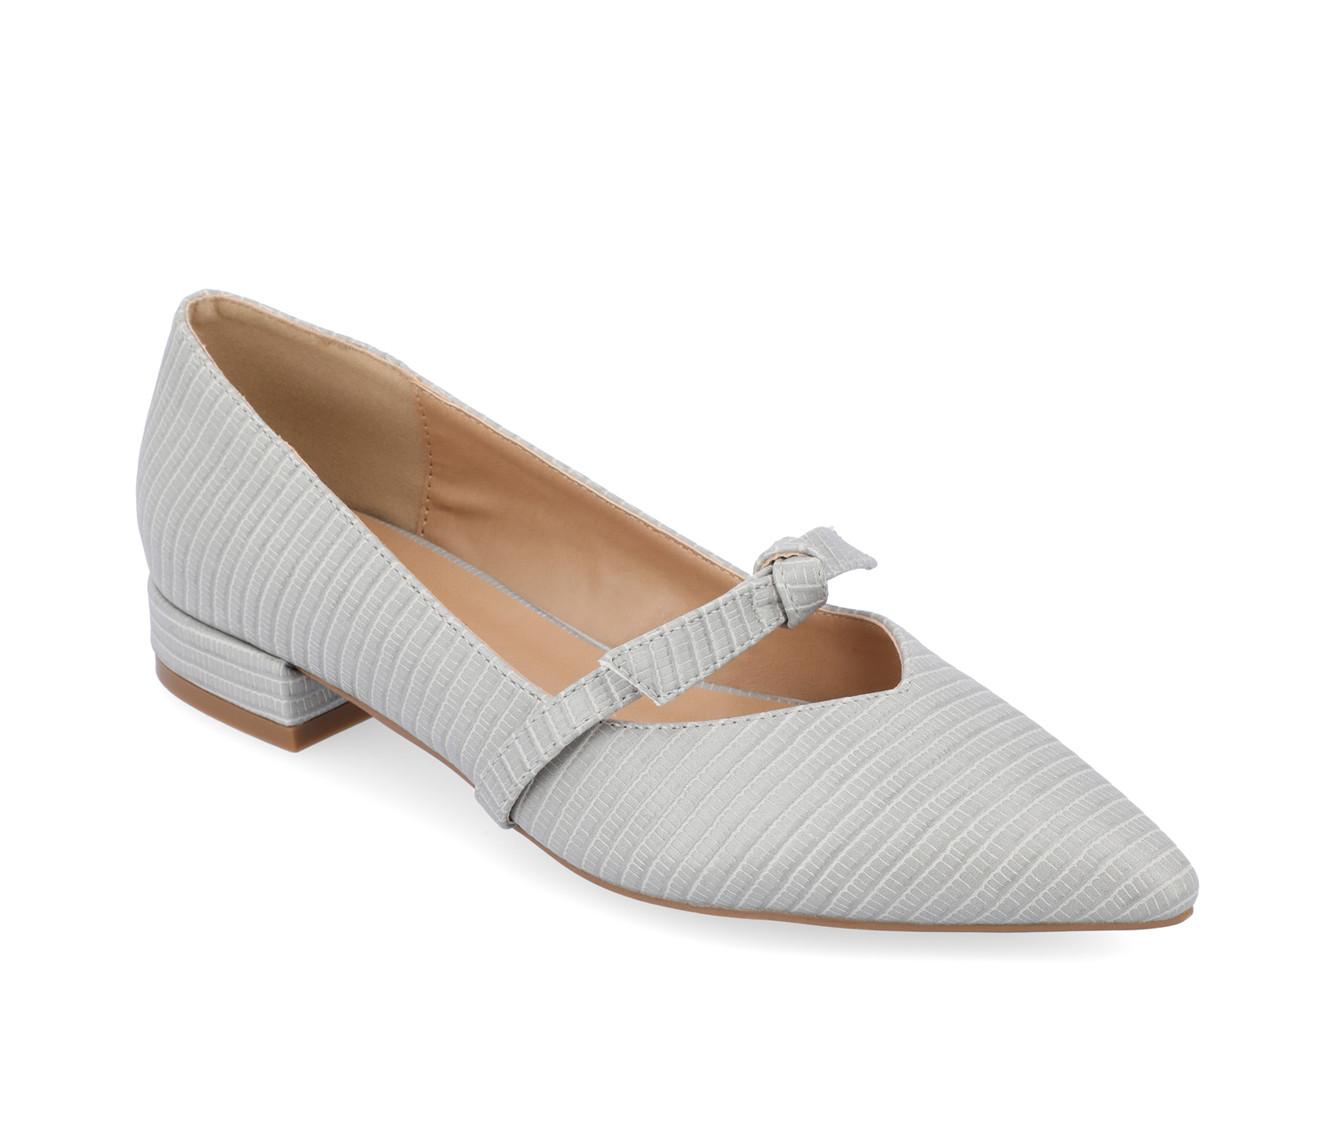 Women's Journee Collection Cait Mary Jane Pumps